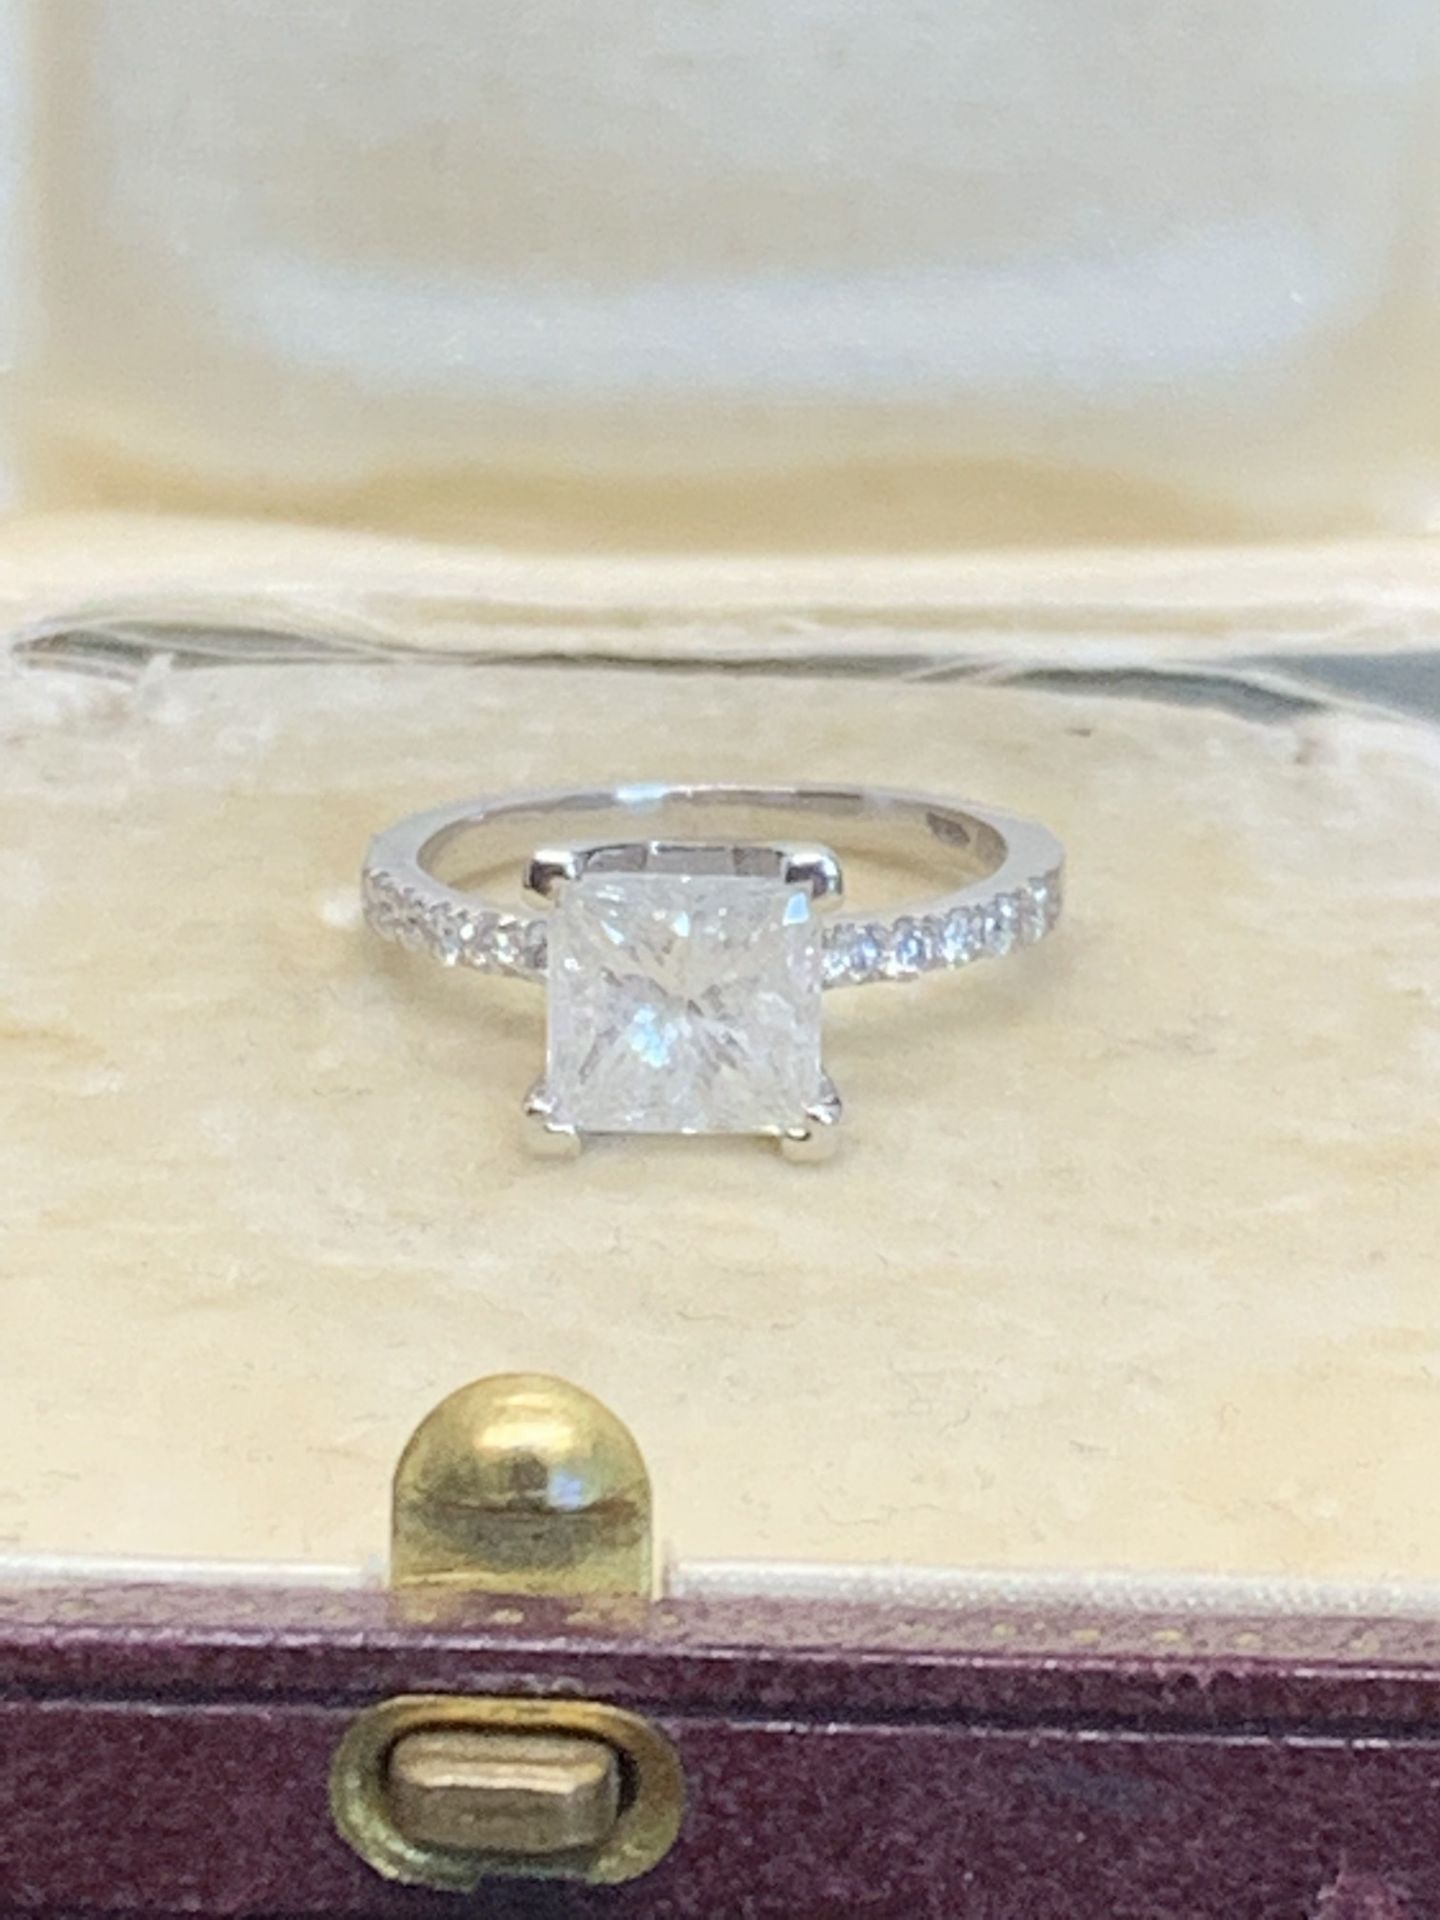 2.82ct PRINCESS CUT DIAMOND SOLITAIRE RING SET IN WHITE METAL TESTED AS WHITE GOLD